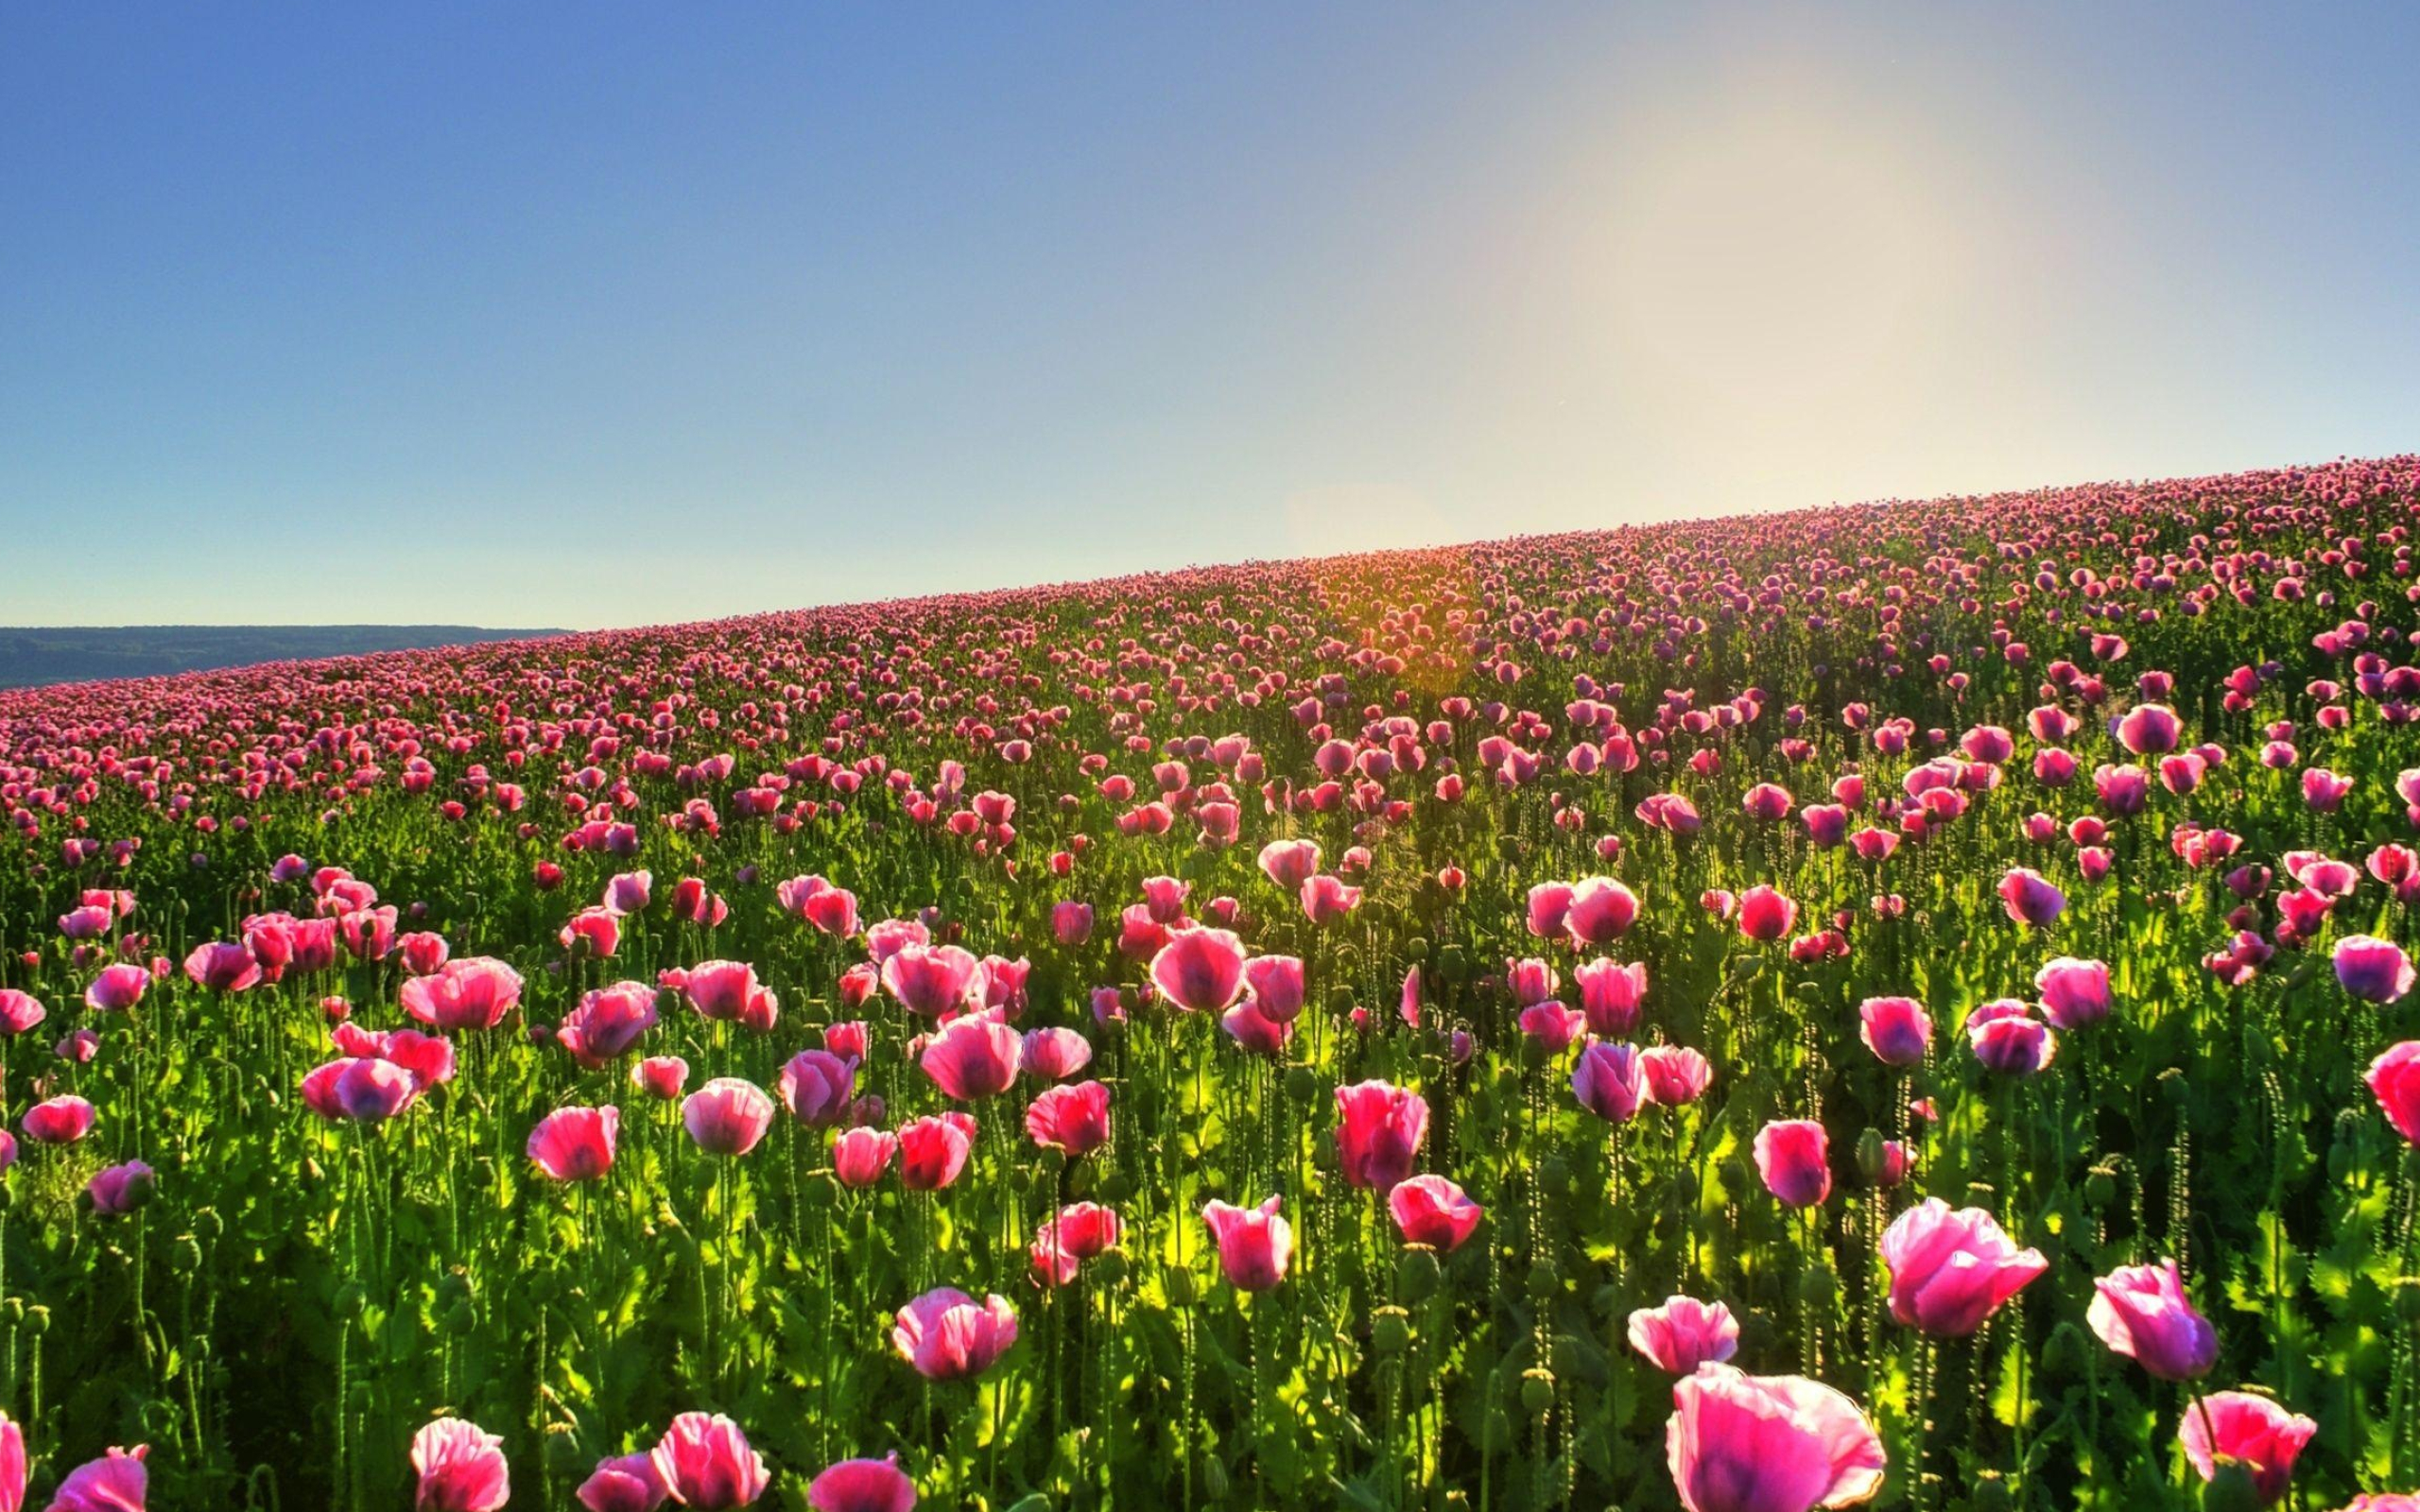 Flower Field: Land covered with wildflowers, Blooming poppies in the meadow. 2560x1600 HD Wallpaper.